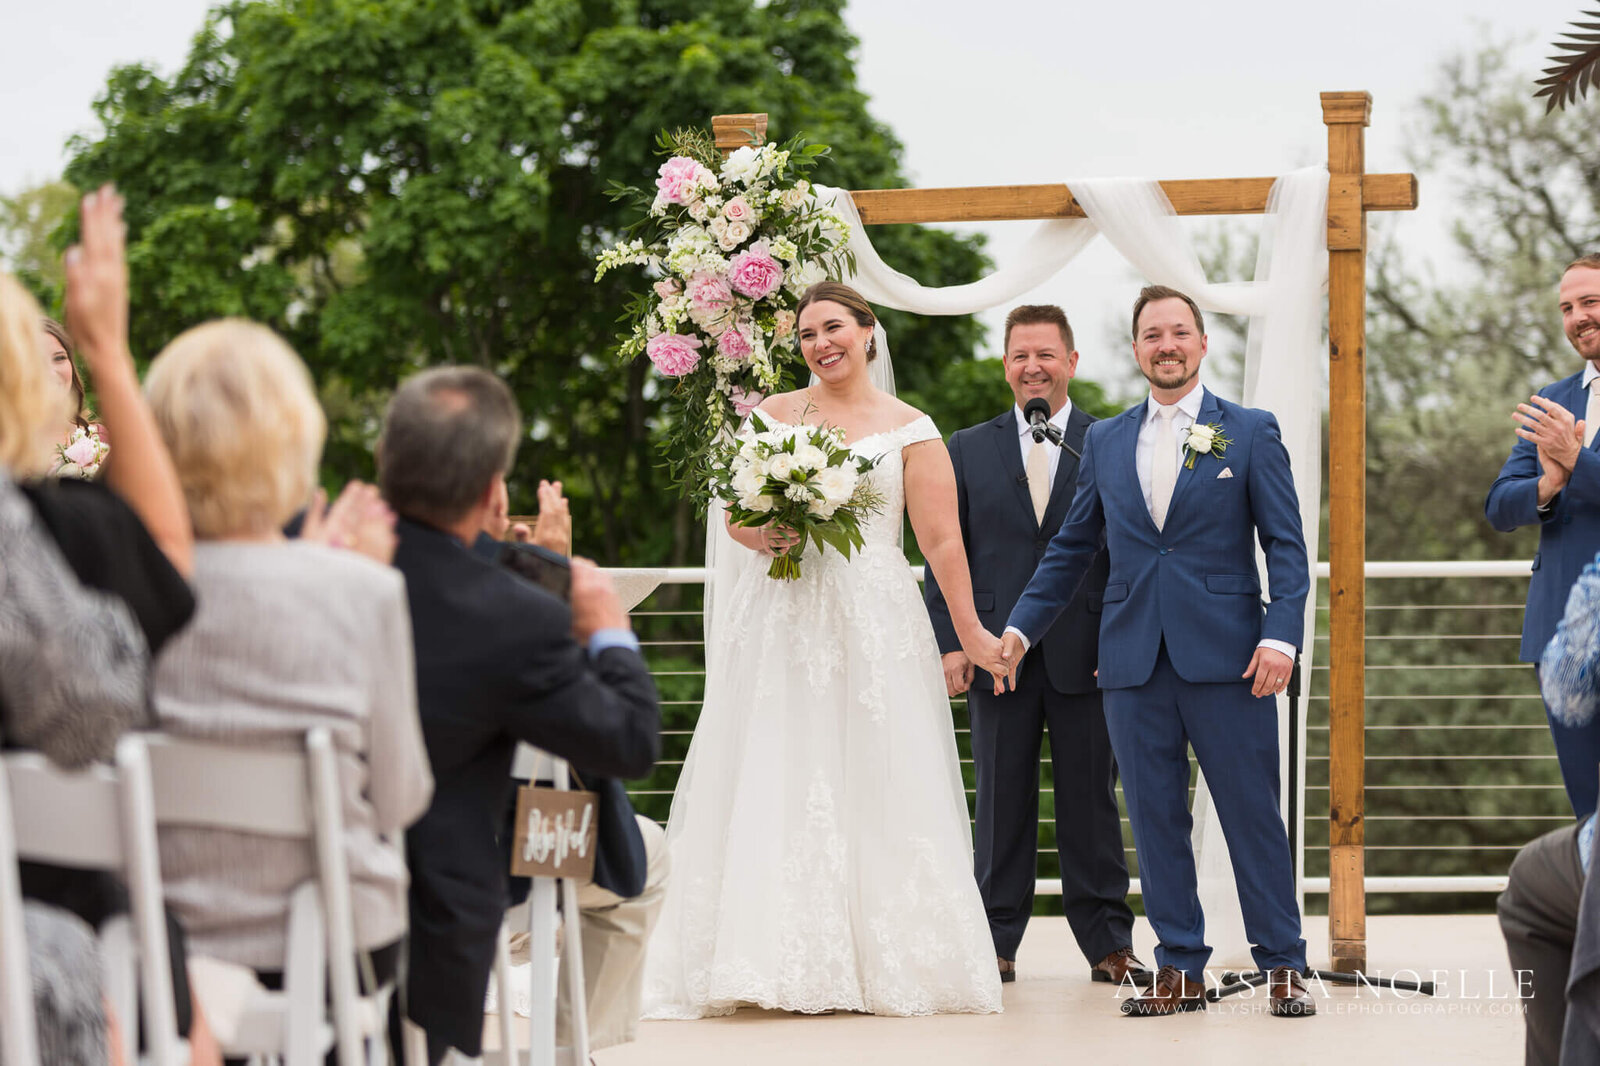 Wedding-at-River-Club-of-Mequon-644